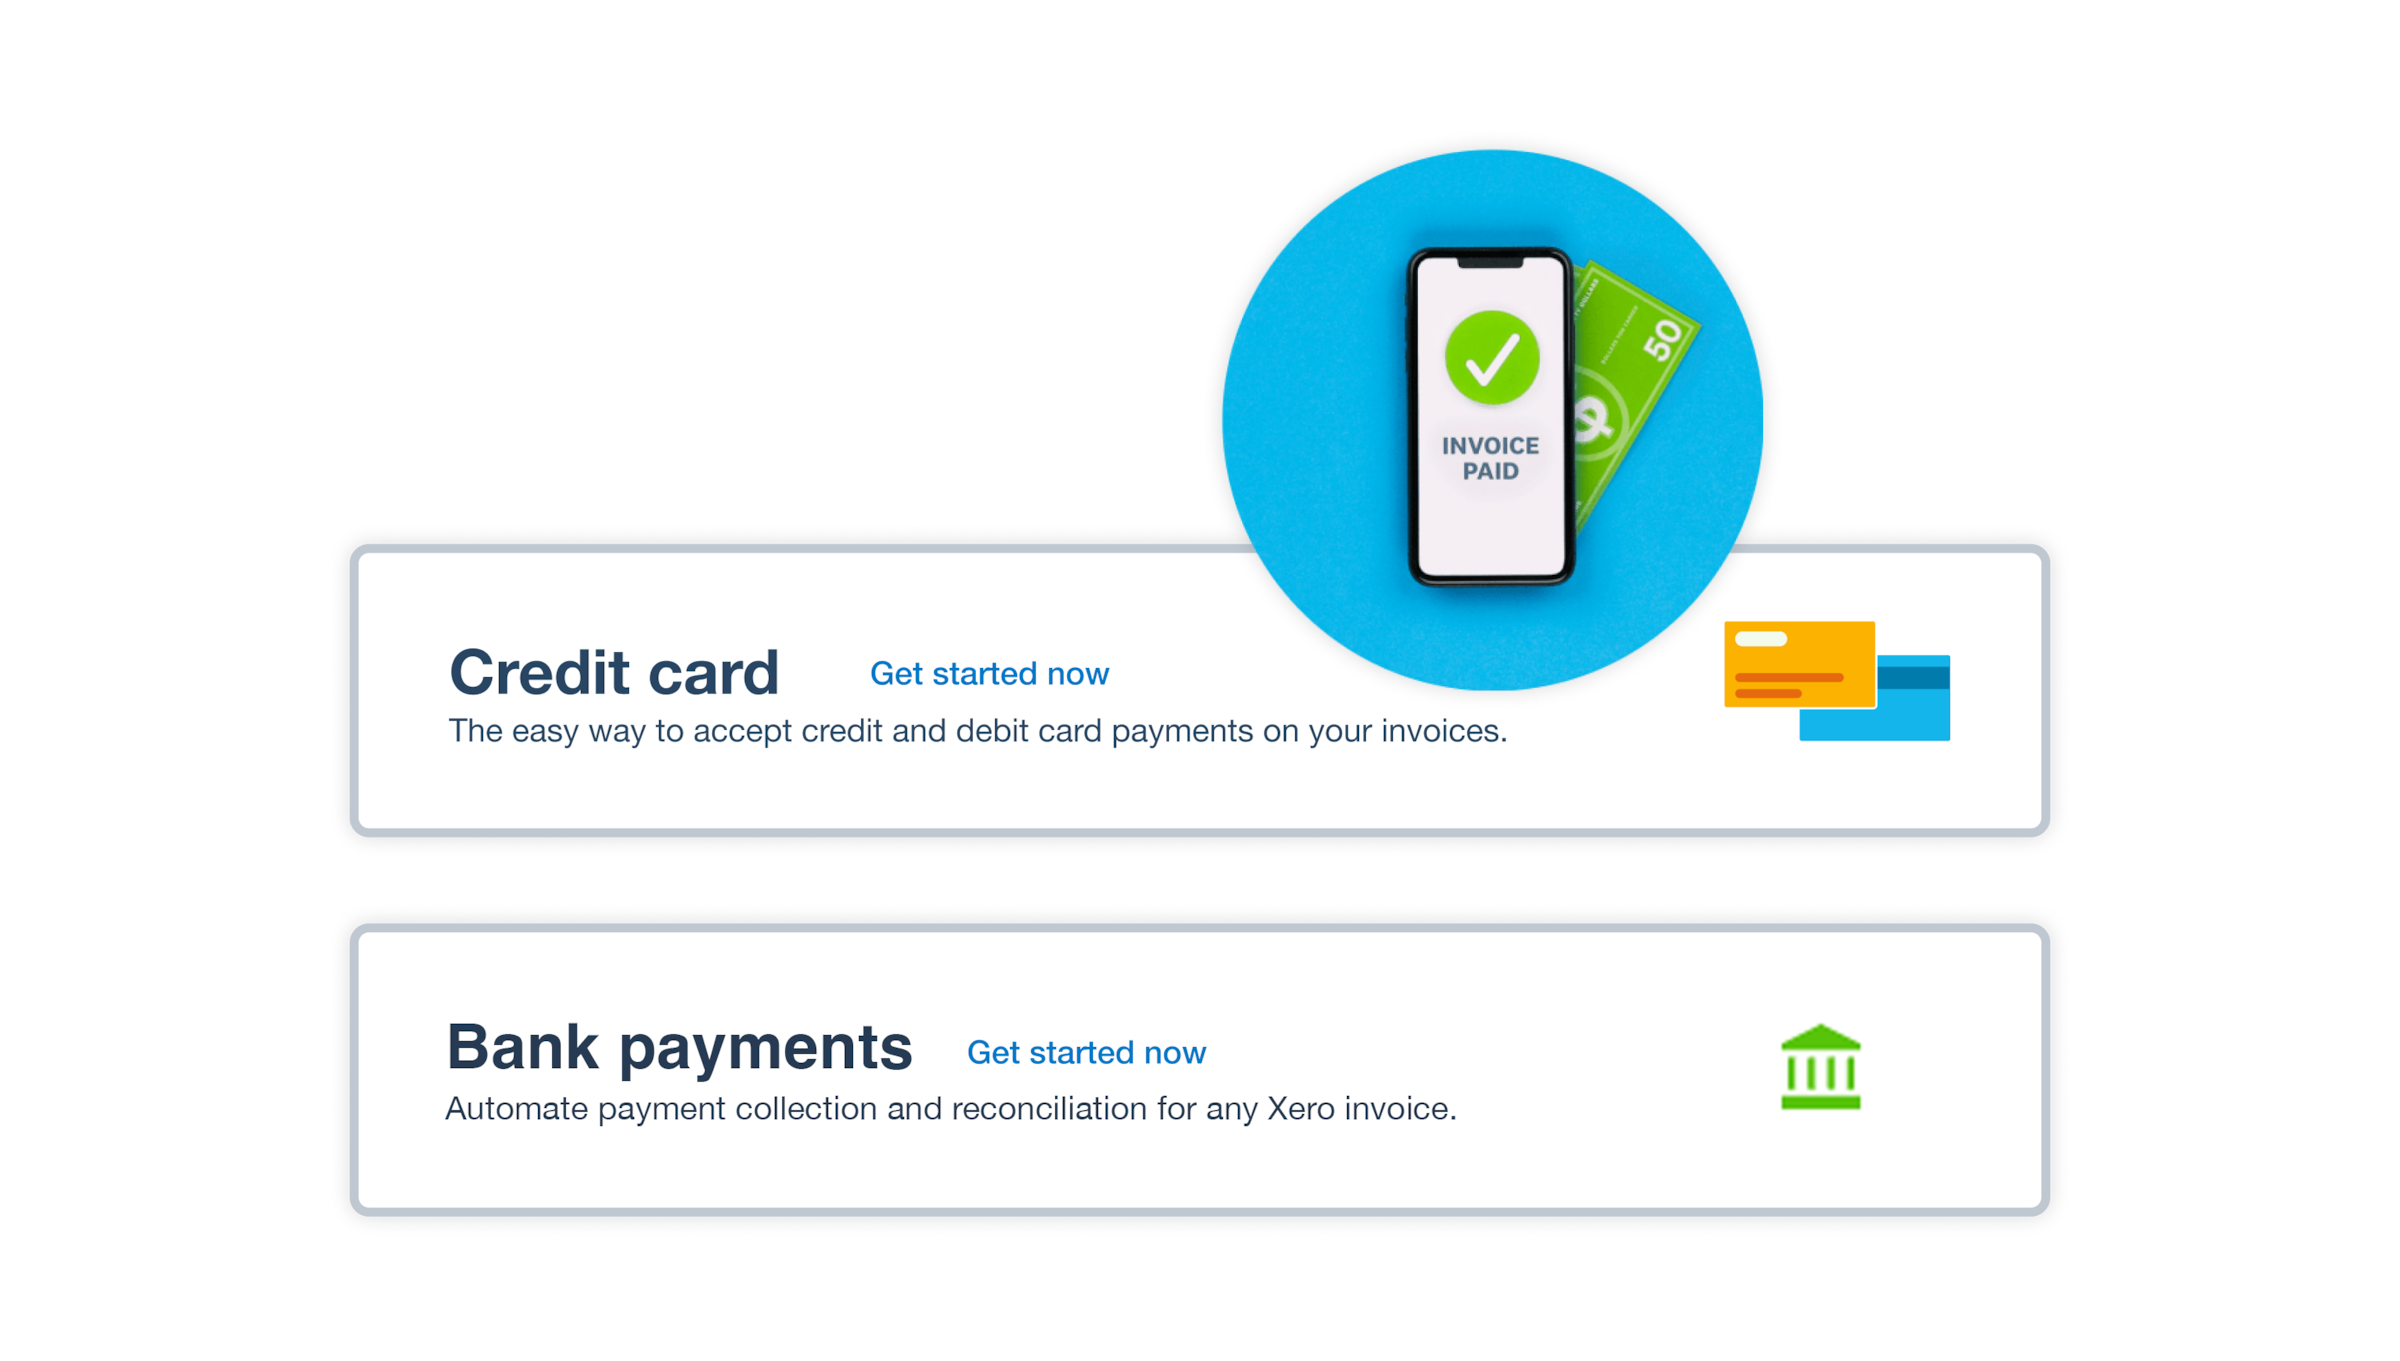 Two options for setting up online invoice payments display: credit card or direct debit.